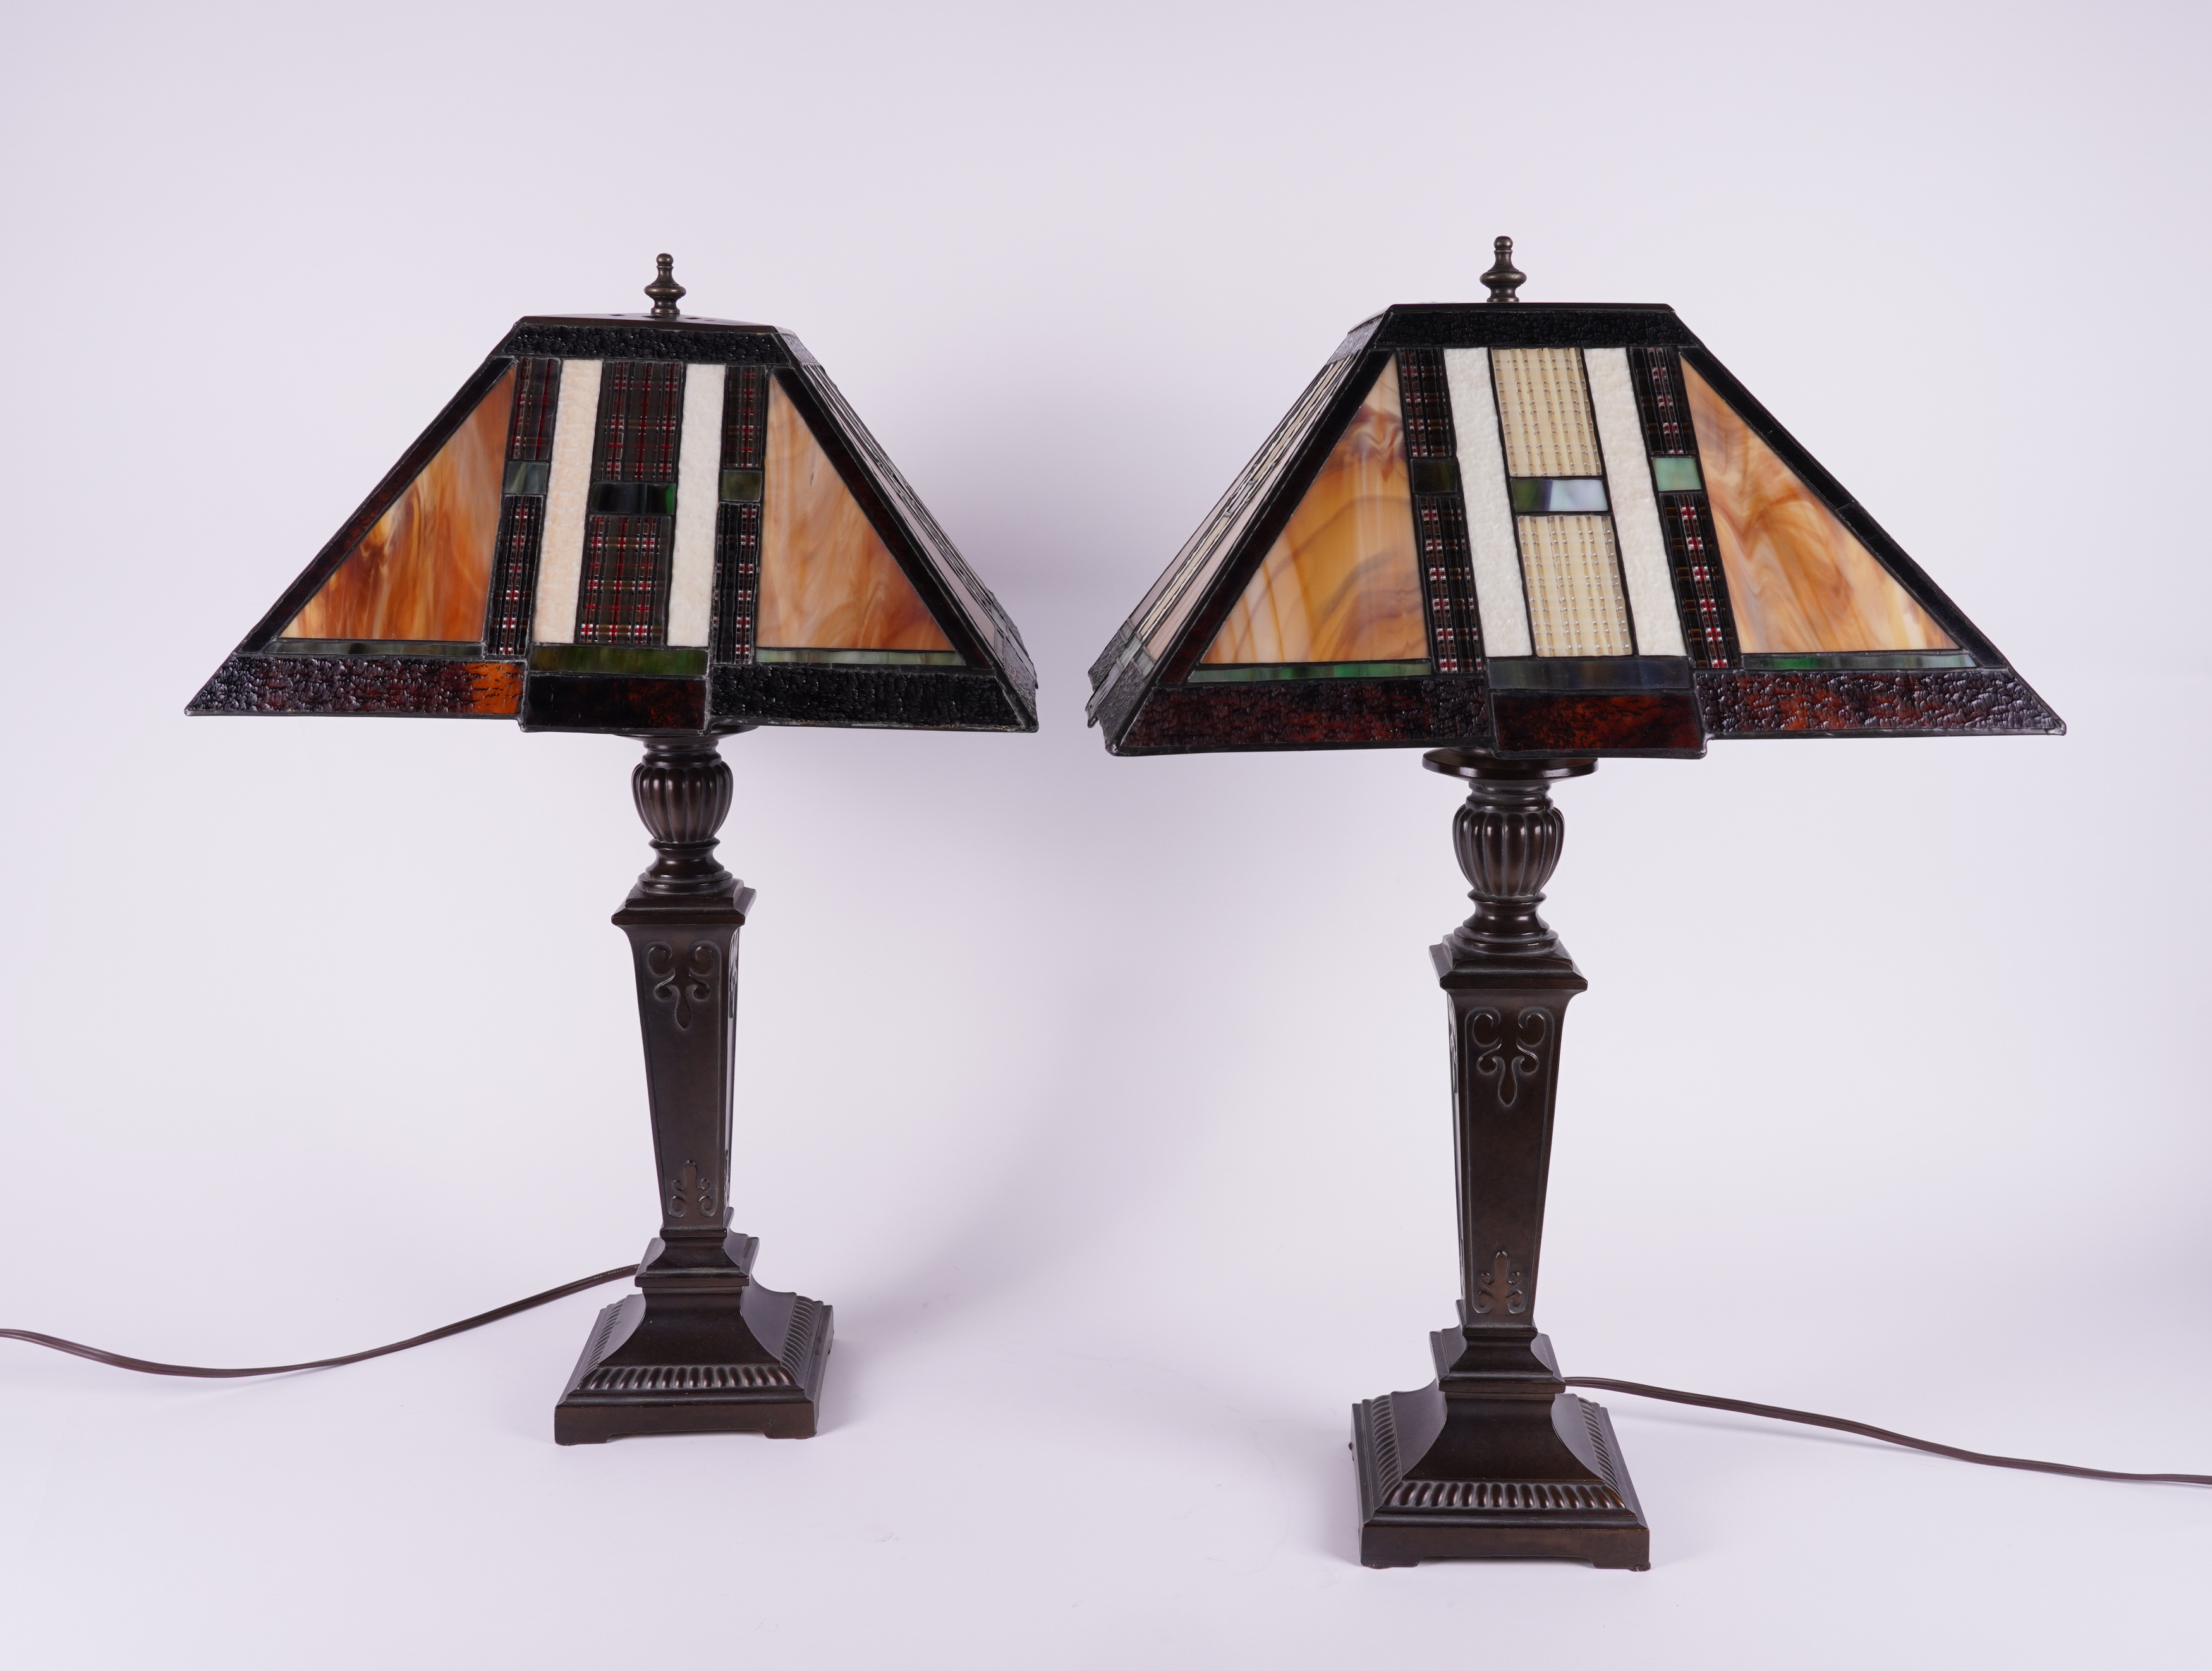 A PAIR OF AMERICAN TIFFANY STYLE TABLE LAMPS WITH STAINED GLASS SHADES (2) - Image 2 of 4